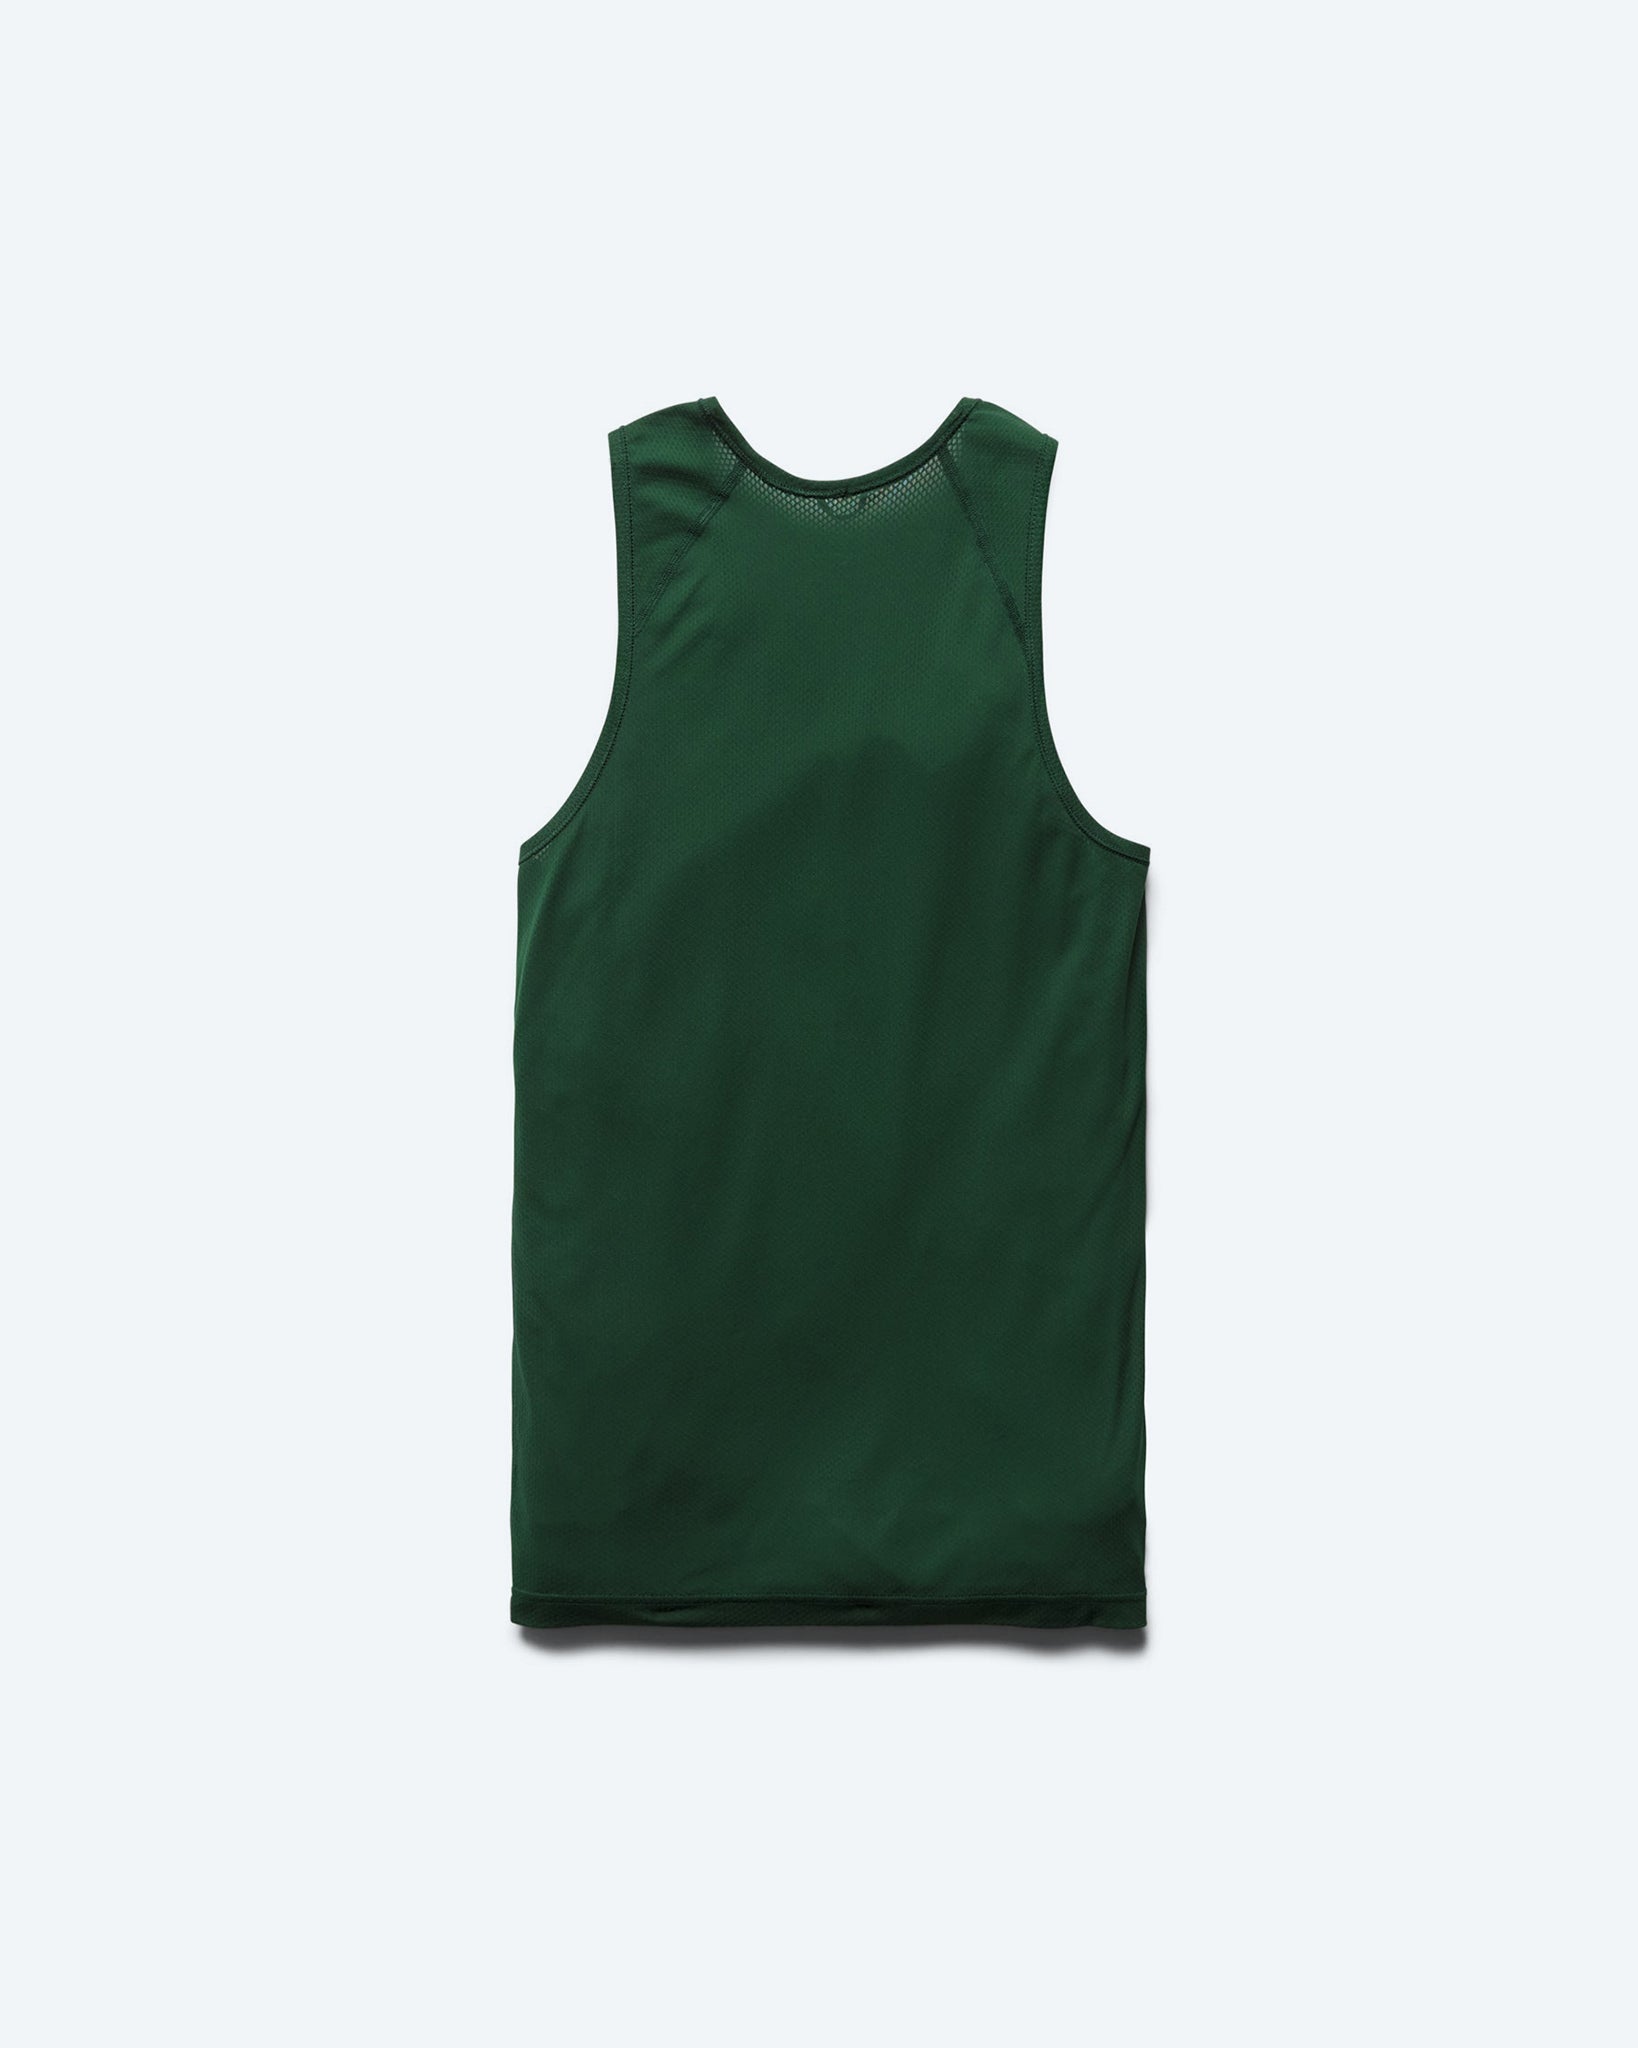 Reigning Champ Scalloped Tank Top